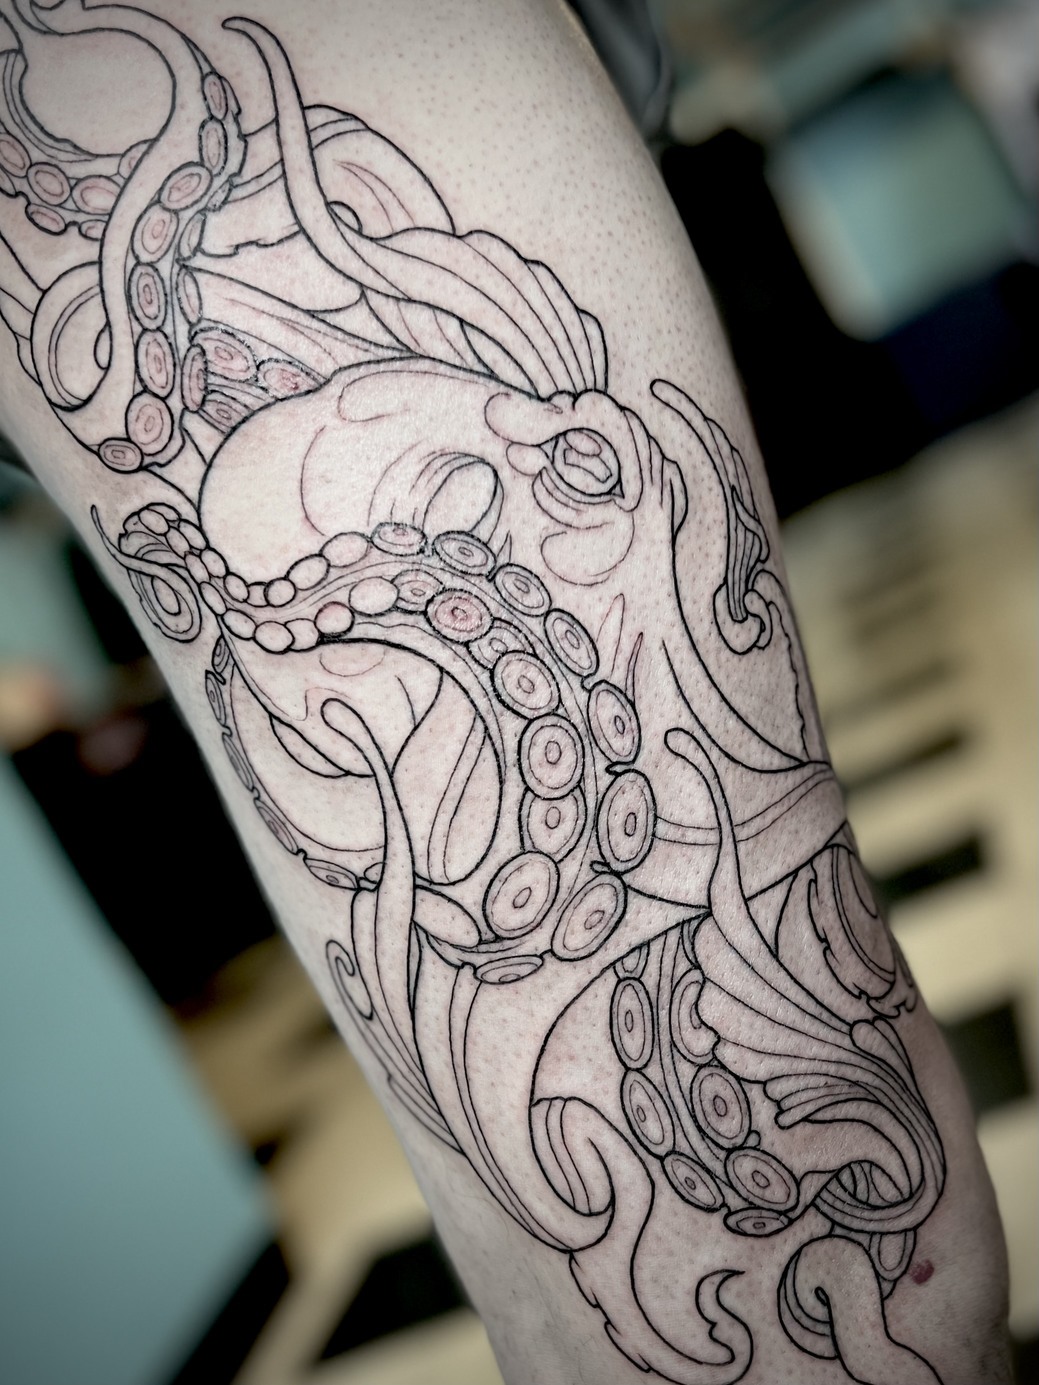 2 Hr Tattoo Session with Ellie Chase (Flash or Custom) – Silent